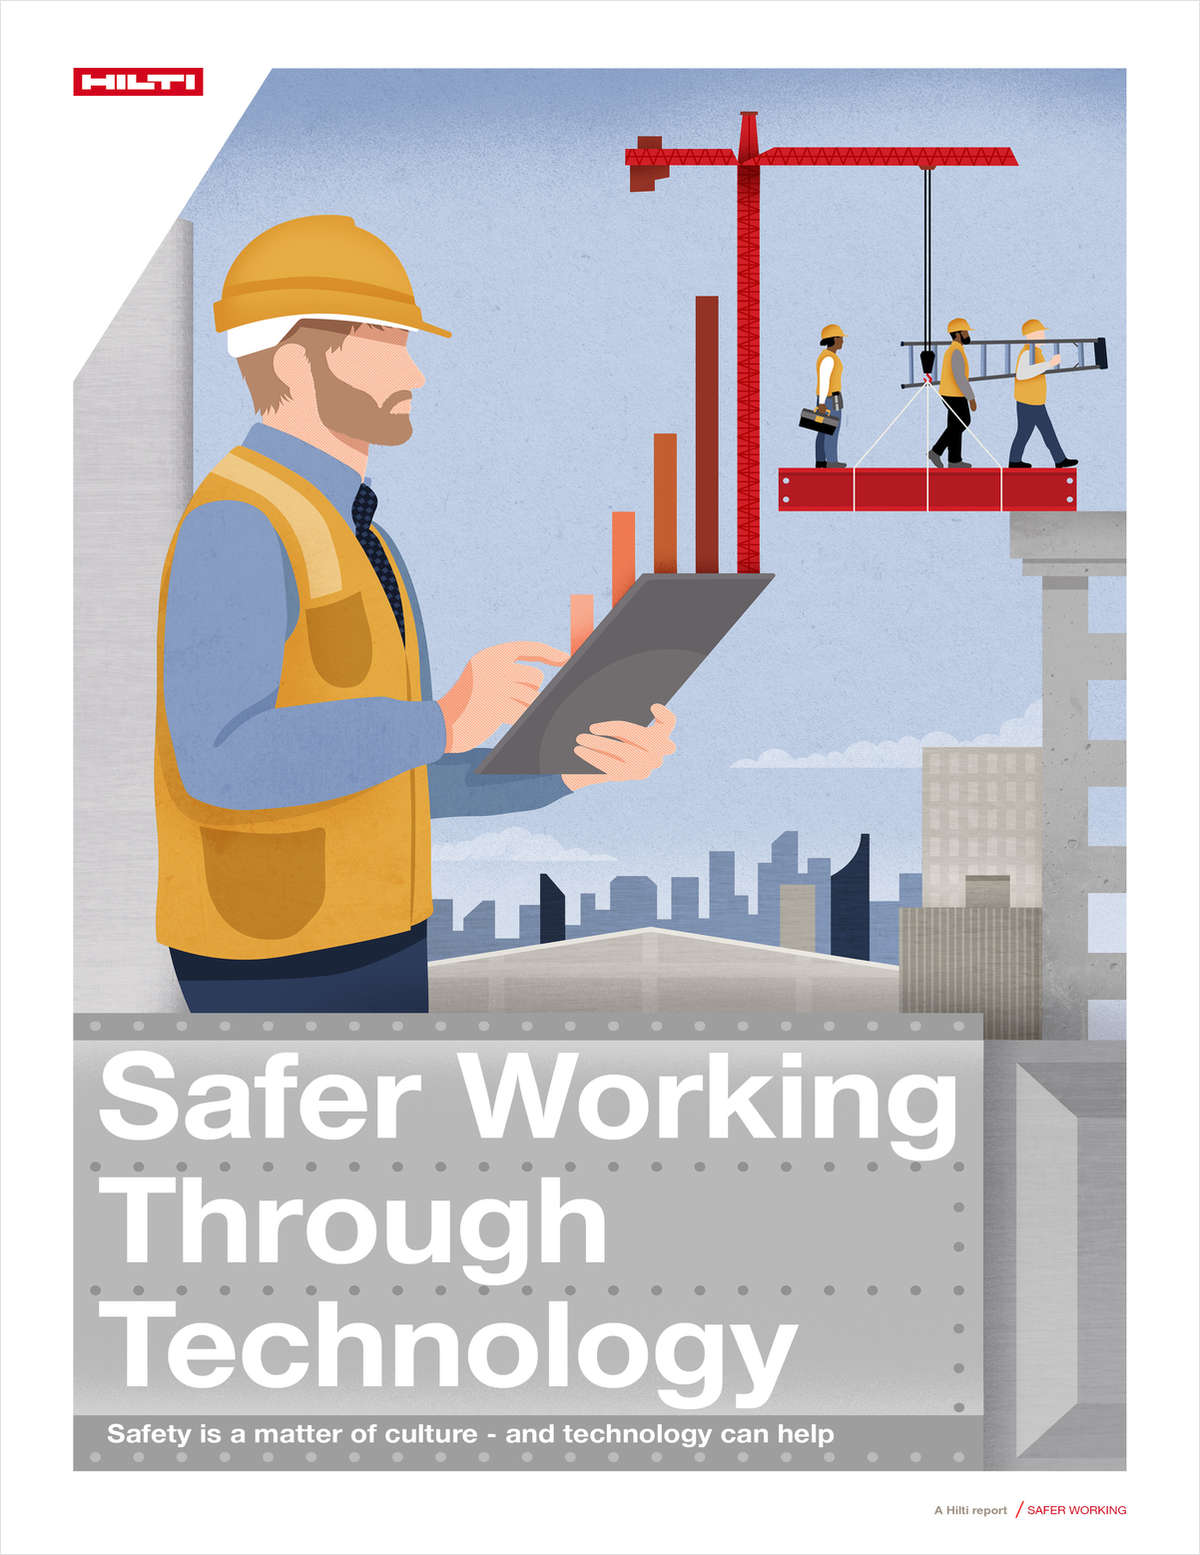 Safer Working Through Technology: Safety is a matter of culture -- technology can help